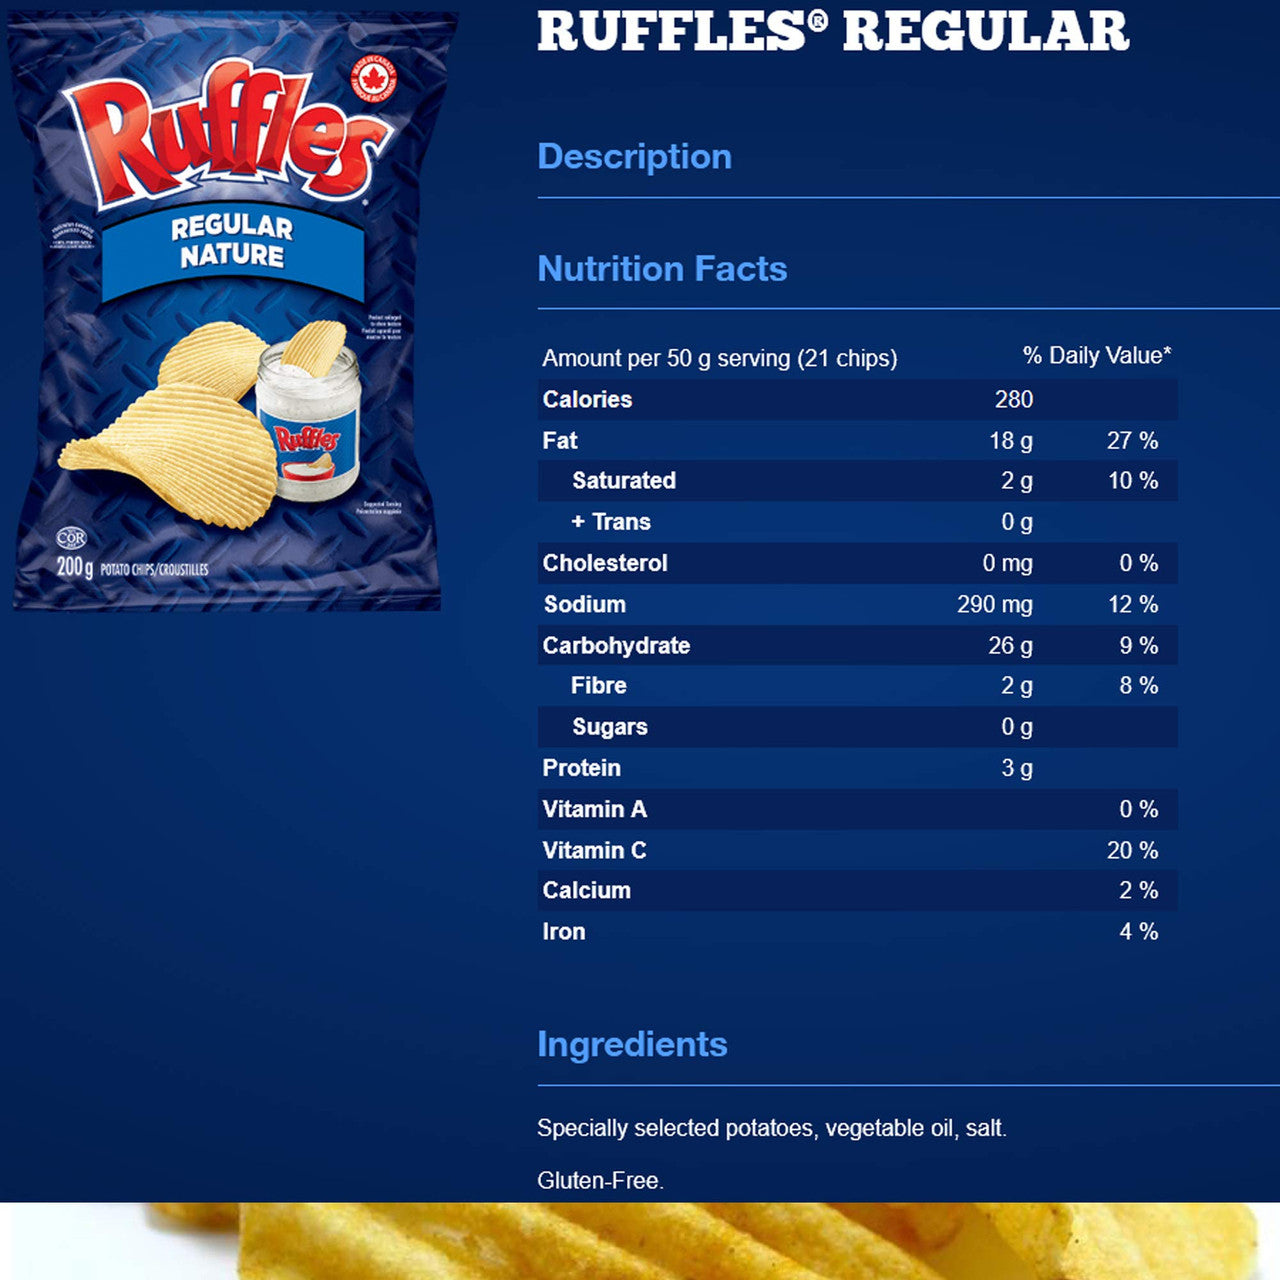 Ruffles Chips Variety Pack 200g/7.1 oz, Sour Cream N' Onion, Sour Cream N' Bacon and Regular {Imported from Canada}